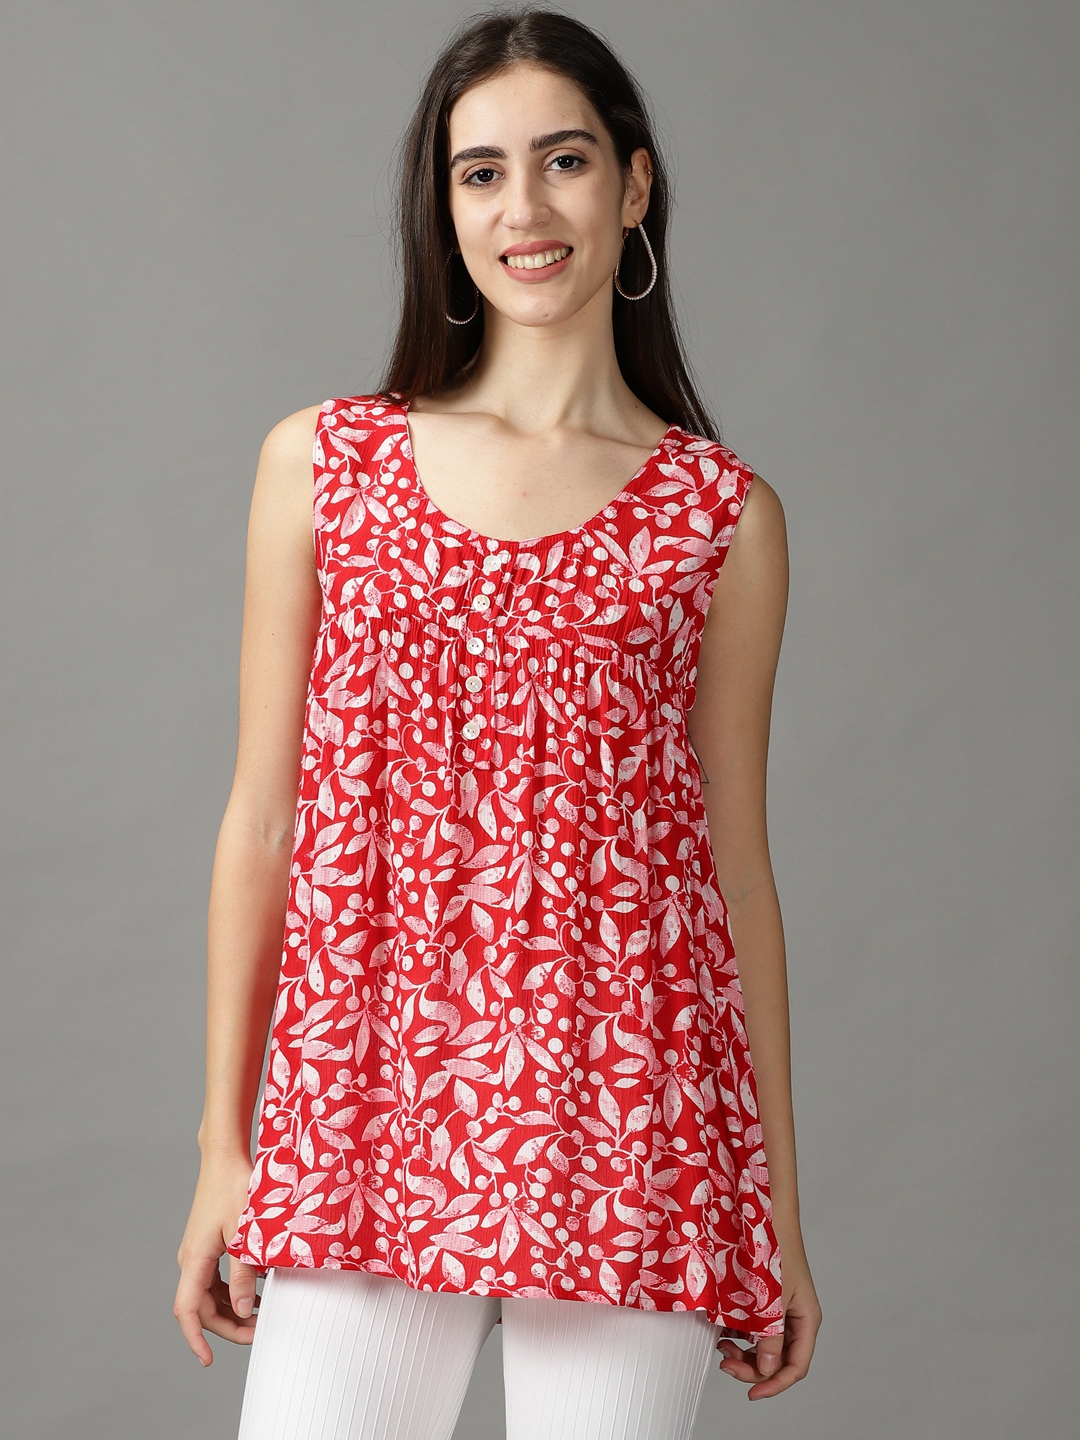 Women's Red Viscose Rayon Printed Tops